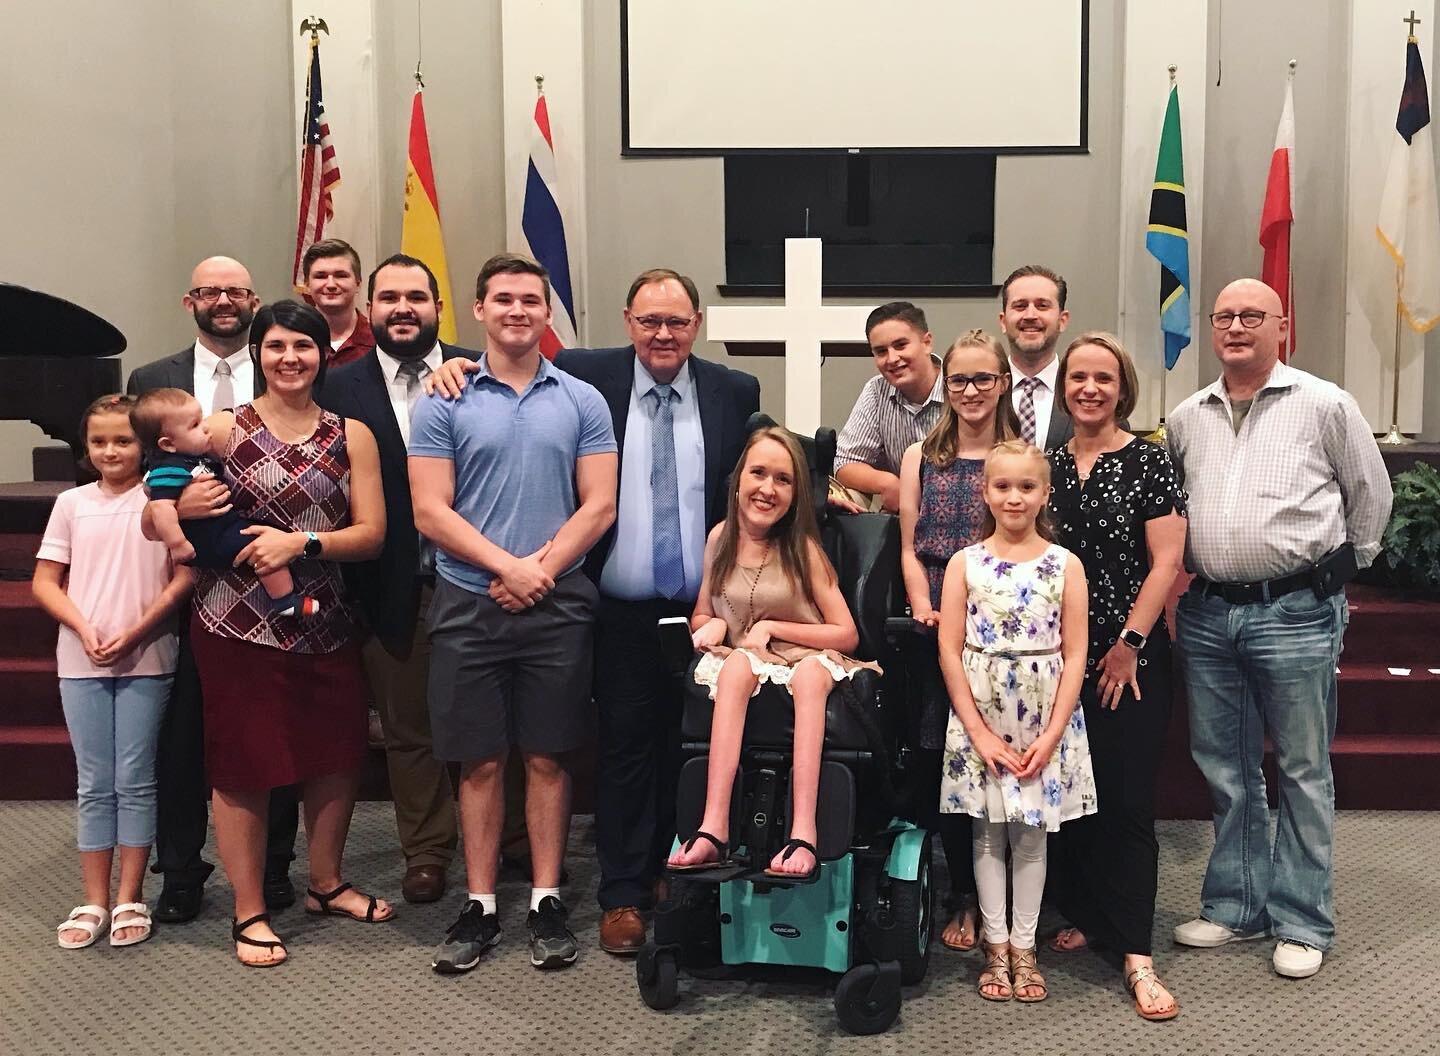 Our precious pastor, Bro. Mike Stancil, went to be with The Savior on June 26th. This photo was taken during a missions conference and represents his biggest passion, sharing Christ with the World! I&rsquo;m so blessed to have been able to whiteness 